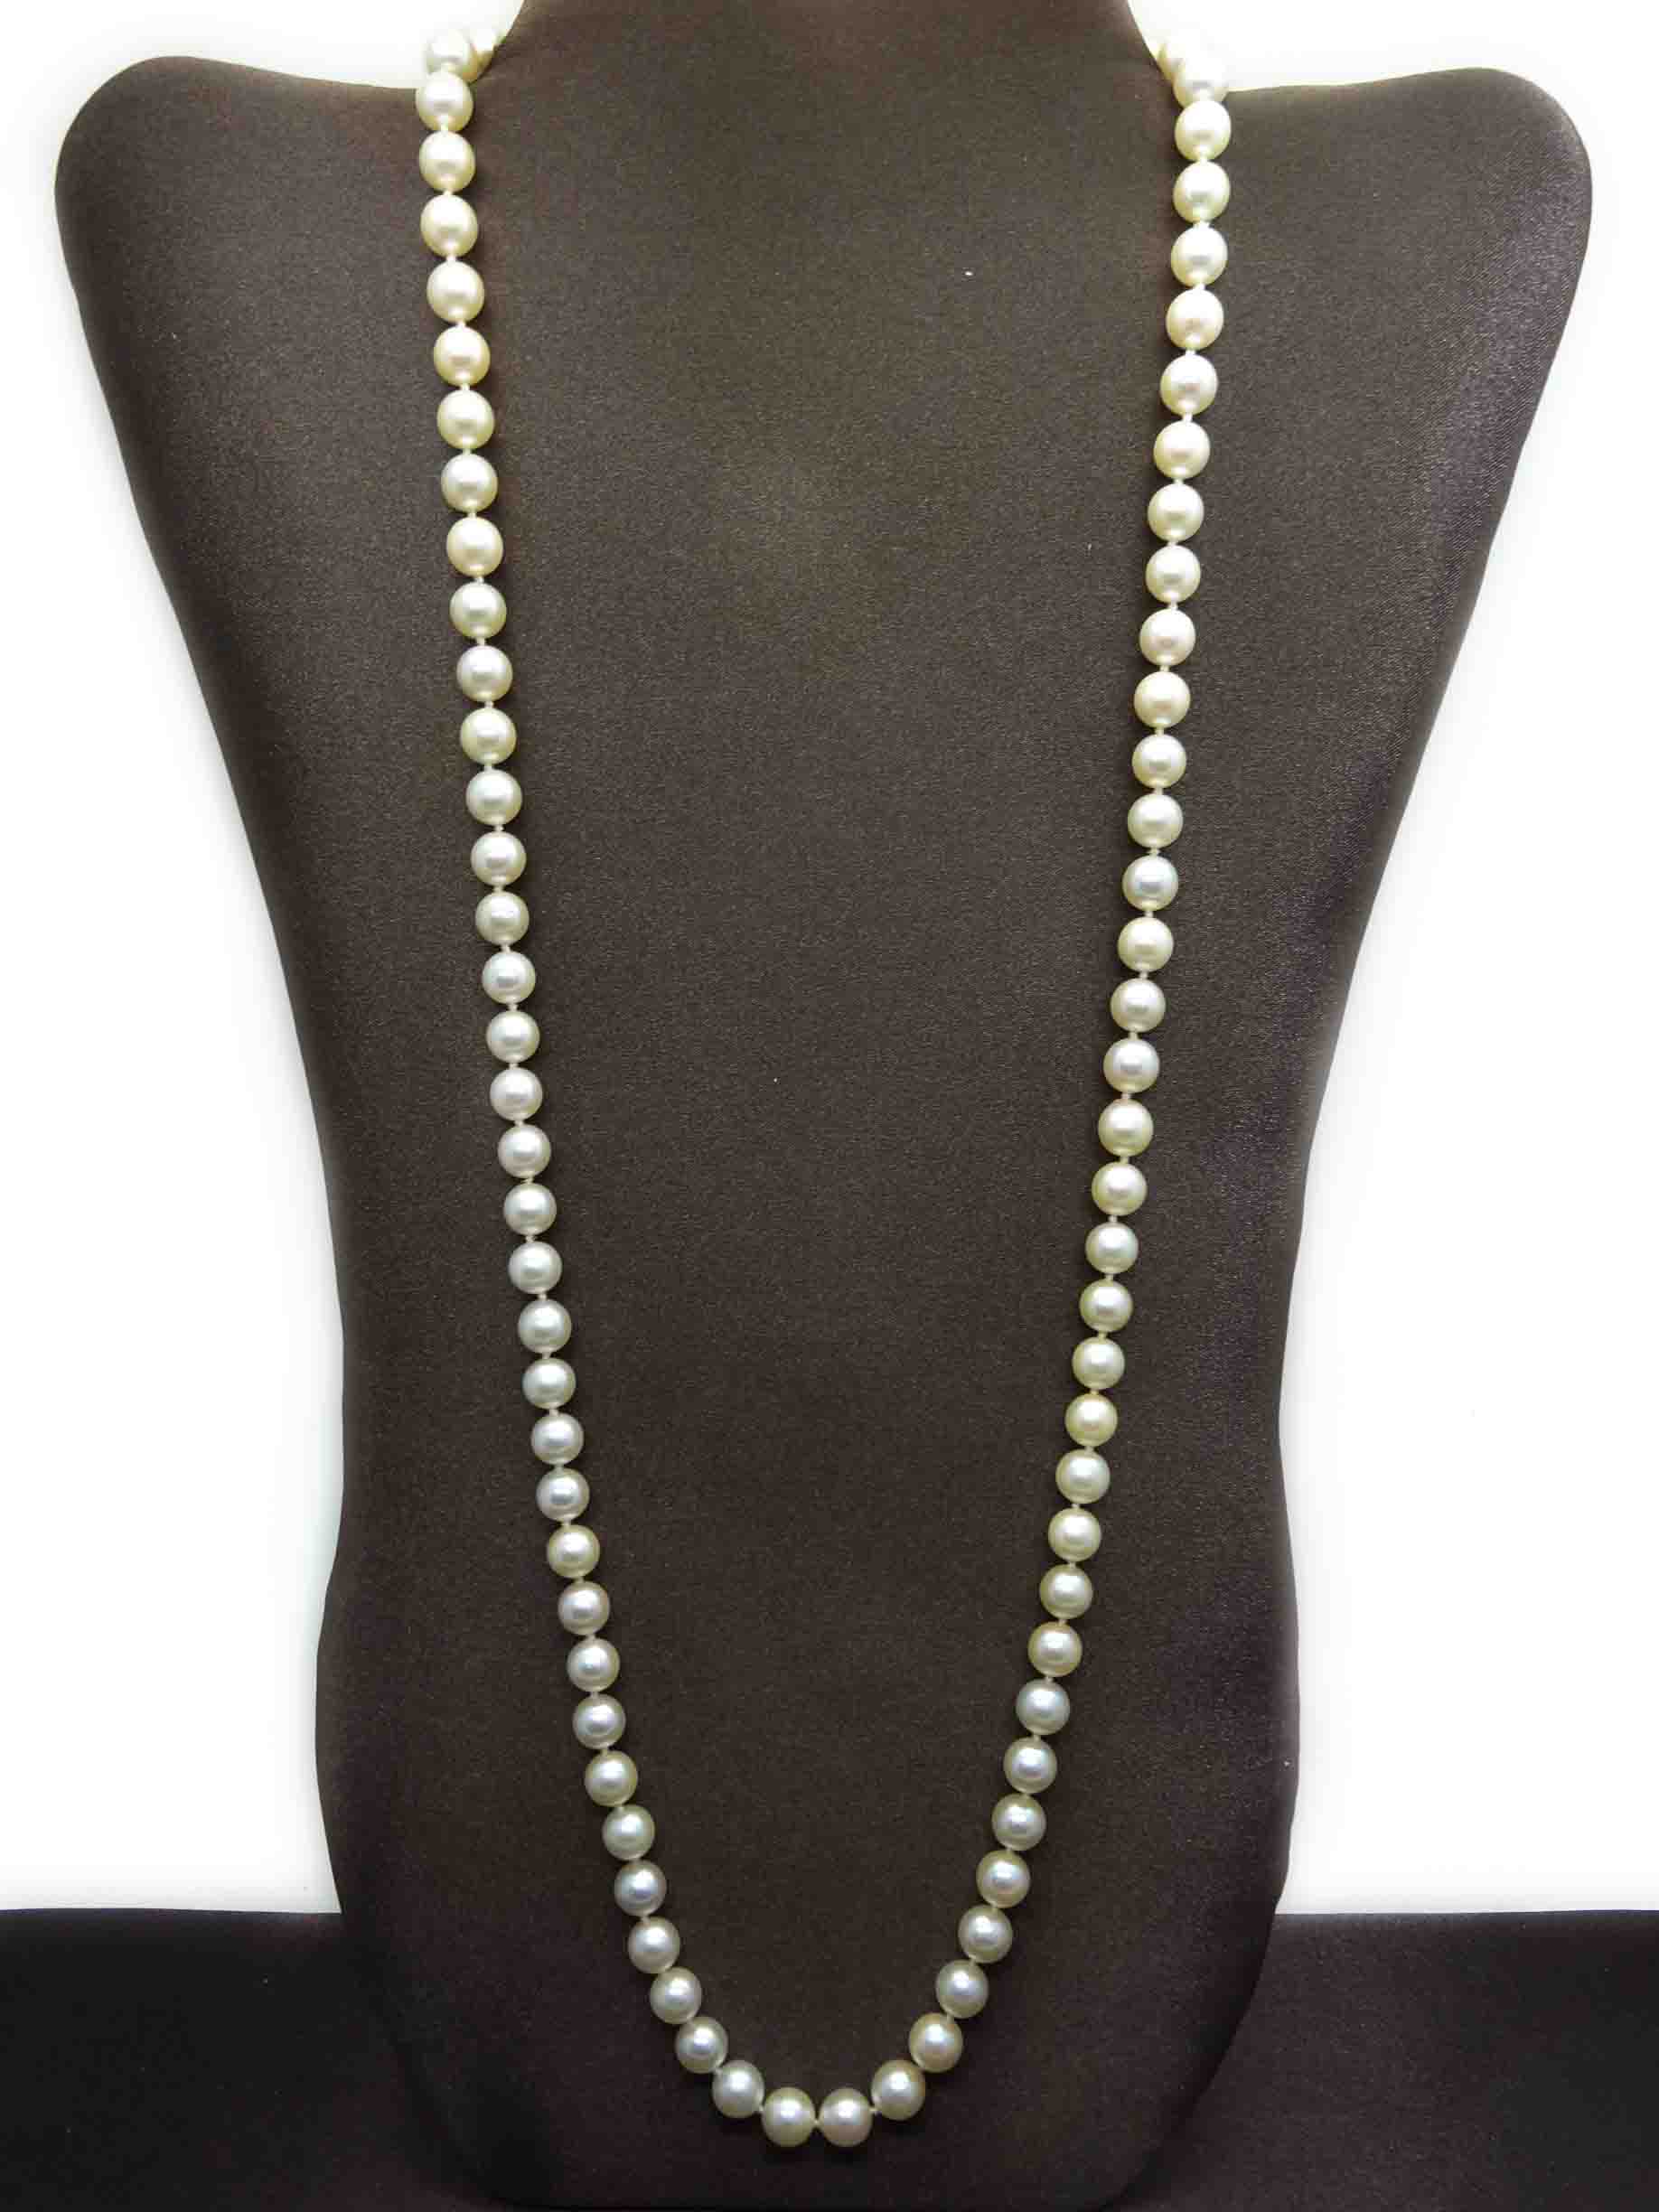 vedanshstore Natural White Pearl Necklace/Moti Mala/White Fresh Water Pearls  For Men, Women , Unisex Pearl Stone Necklace Price in India - Buy  vedanshstore Natural White Pearl Necklace/Moti Mala/White Fresh Water Pearls  For